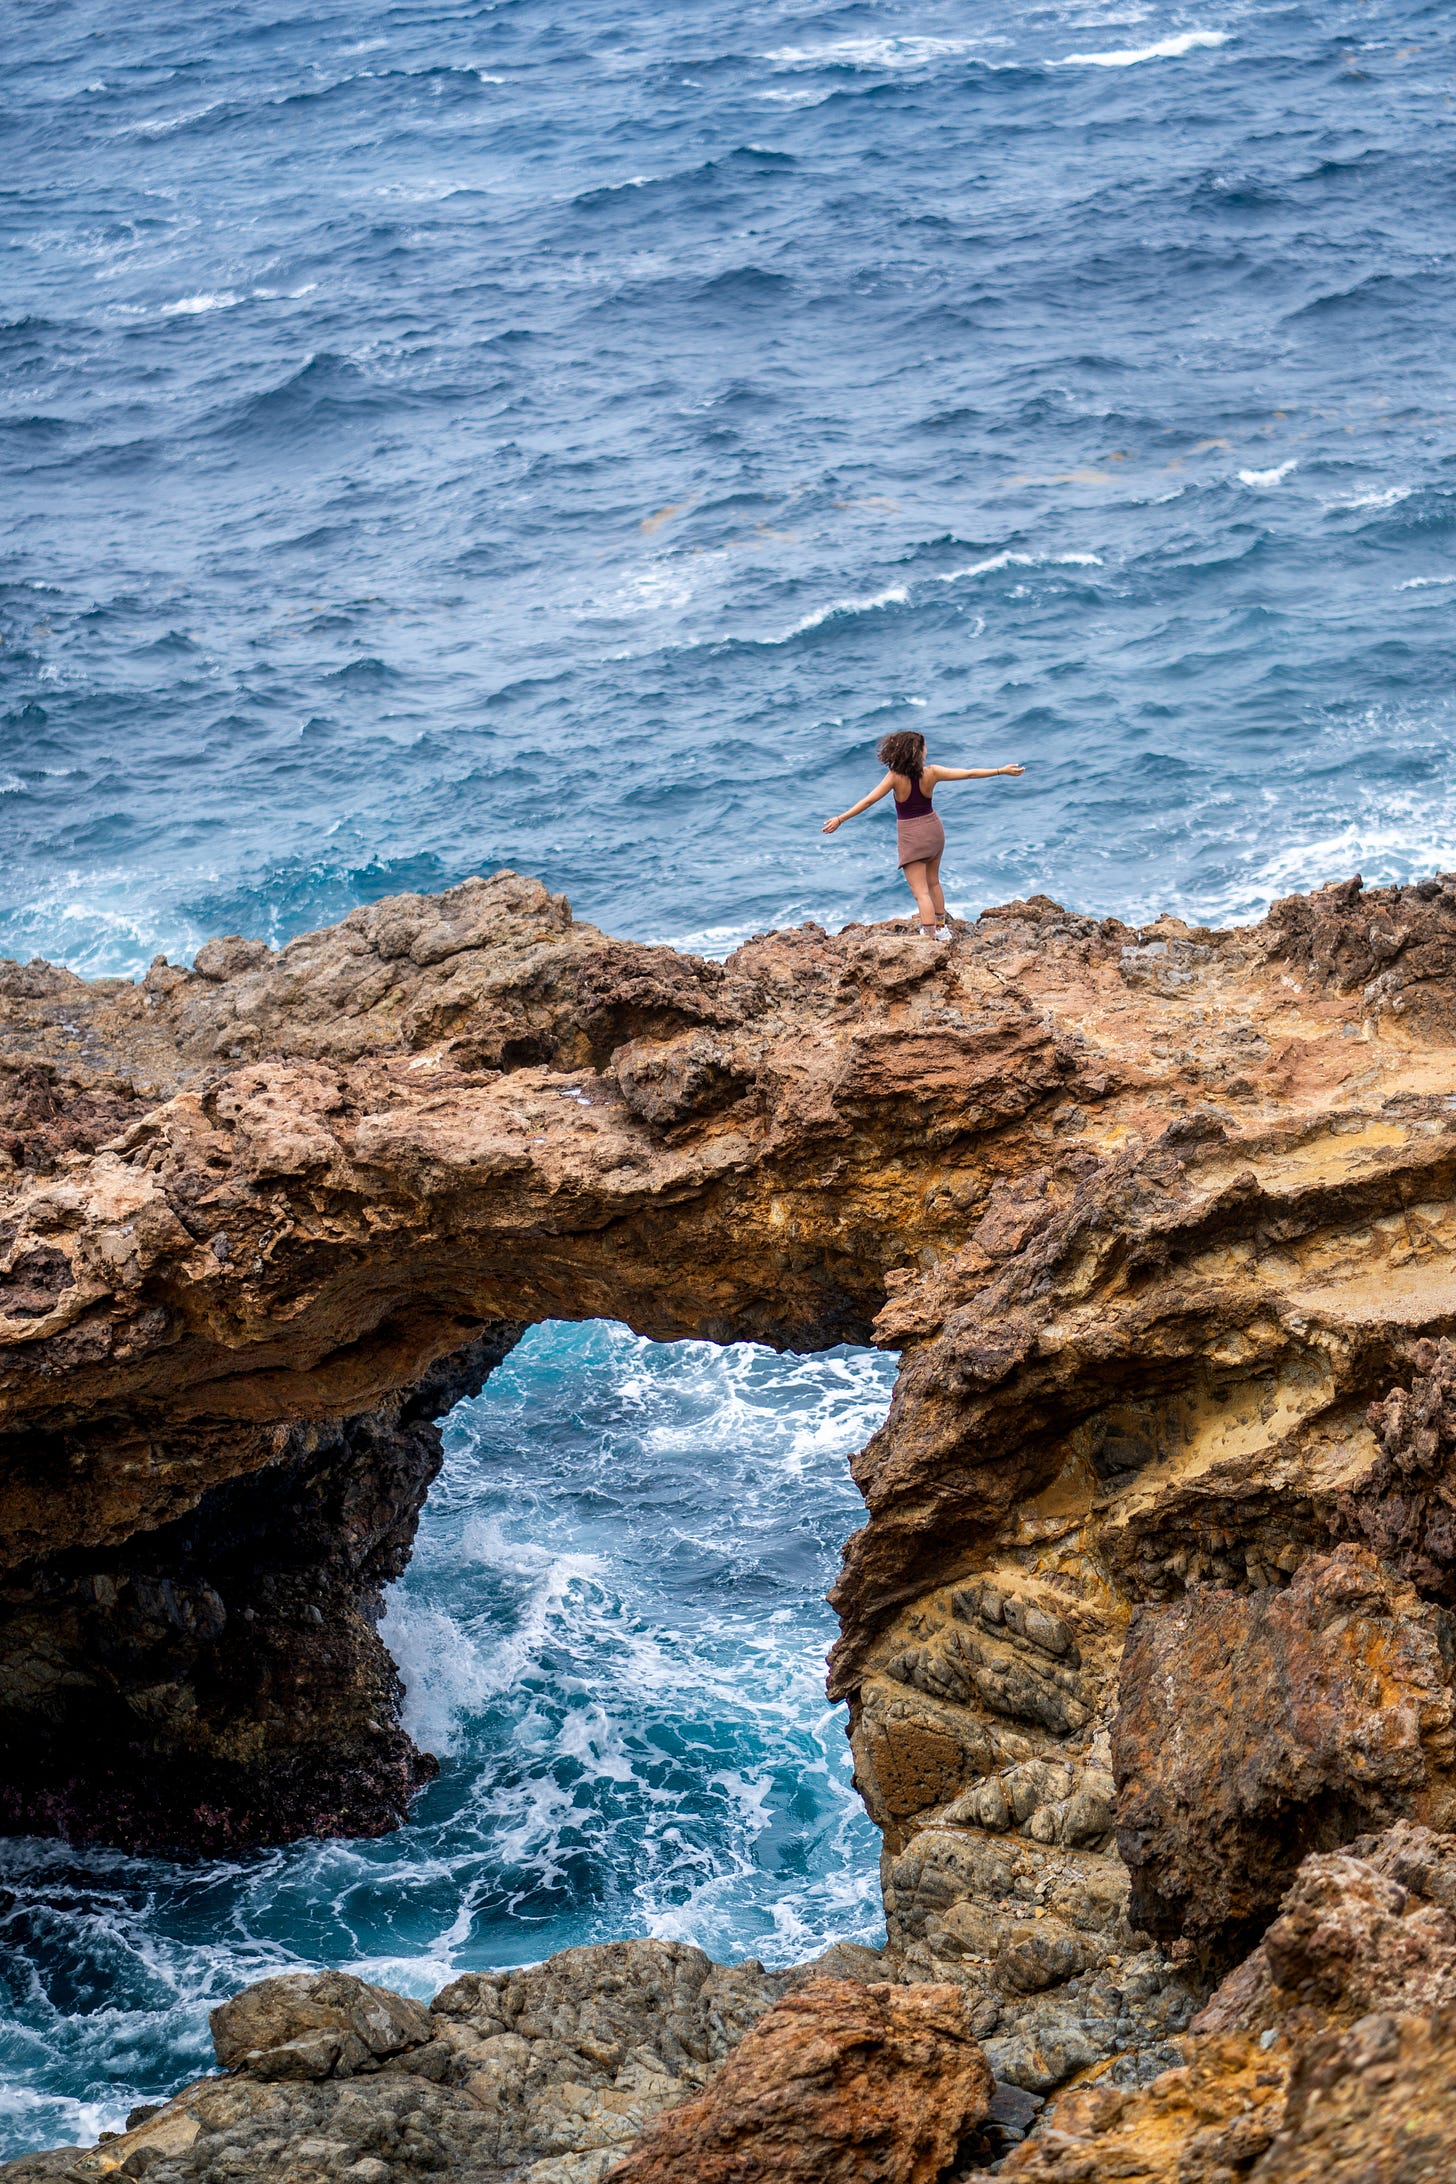 Jennifer Elrod stands on a natural cliff called the Seroe Colorado Cliffs in Aruba. Her arms are spread wide as the ocean churns beneath her.